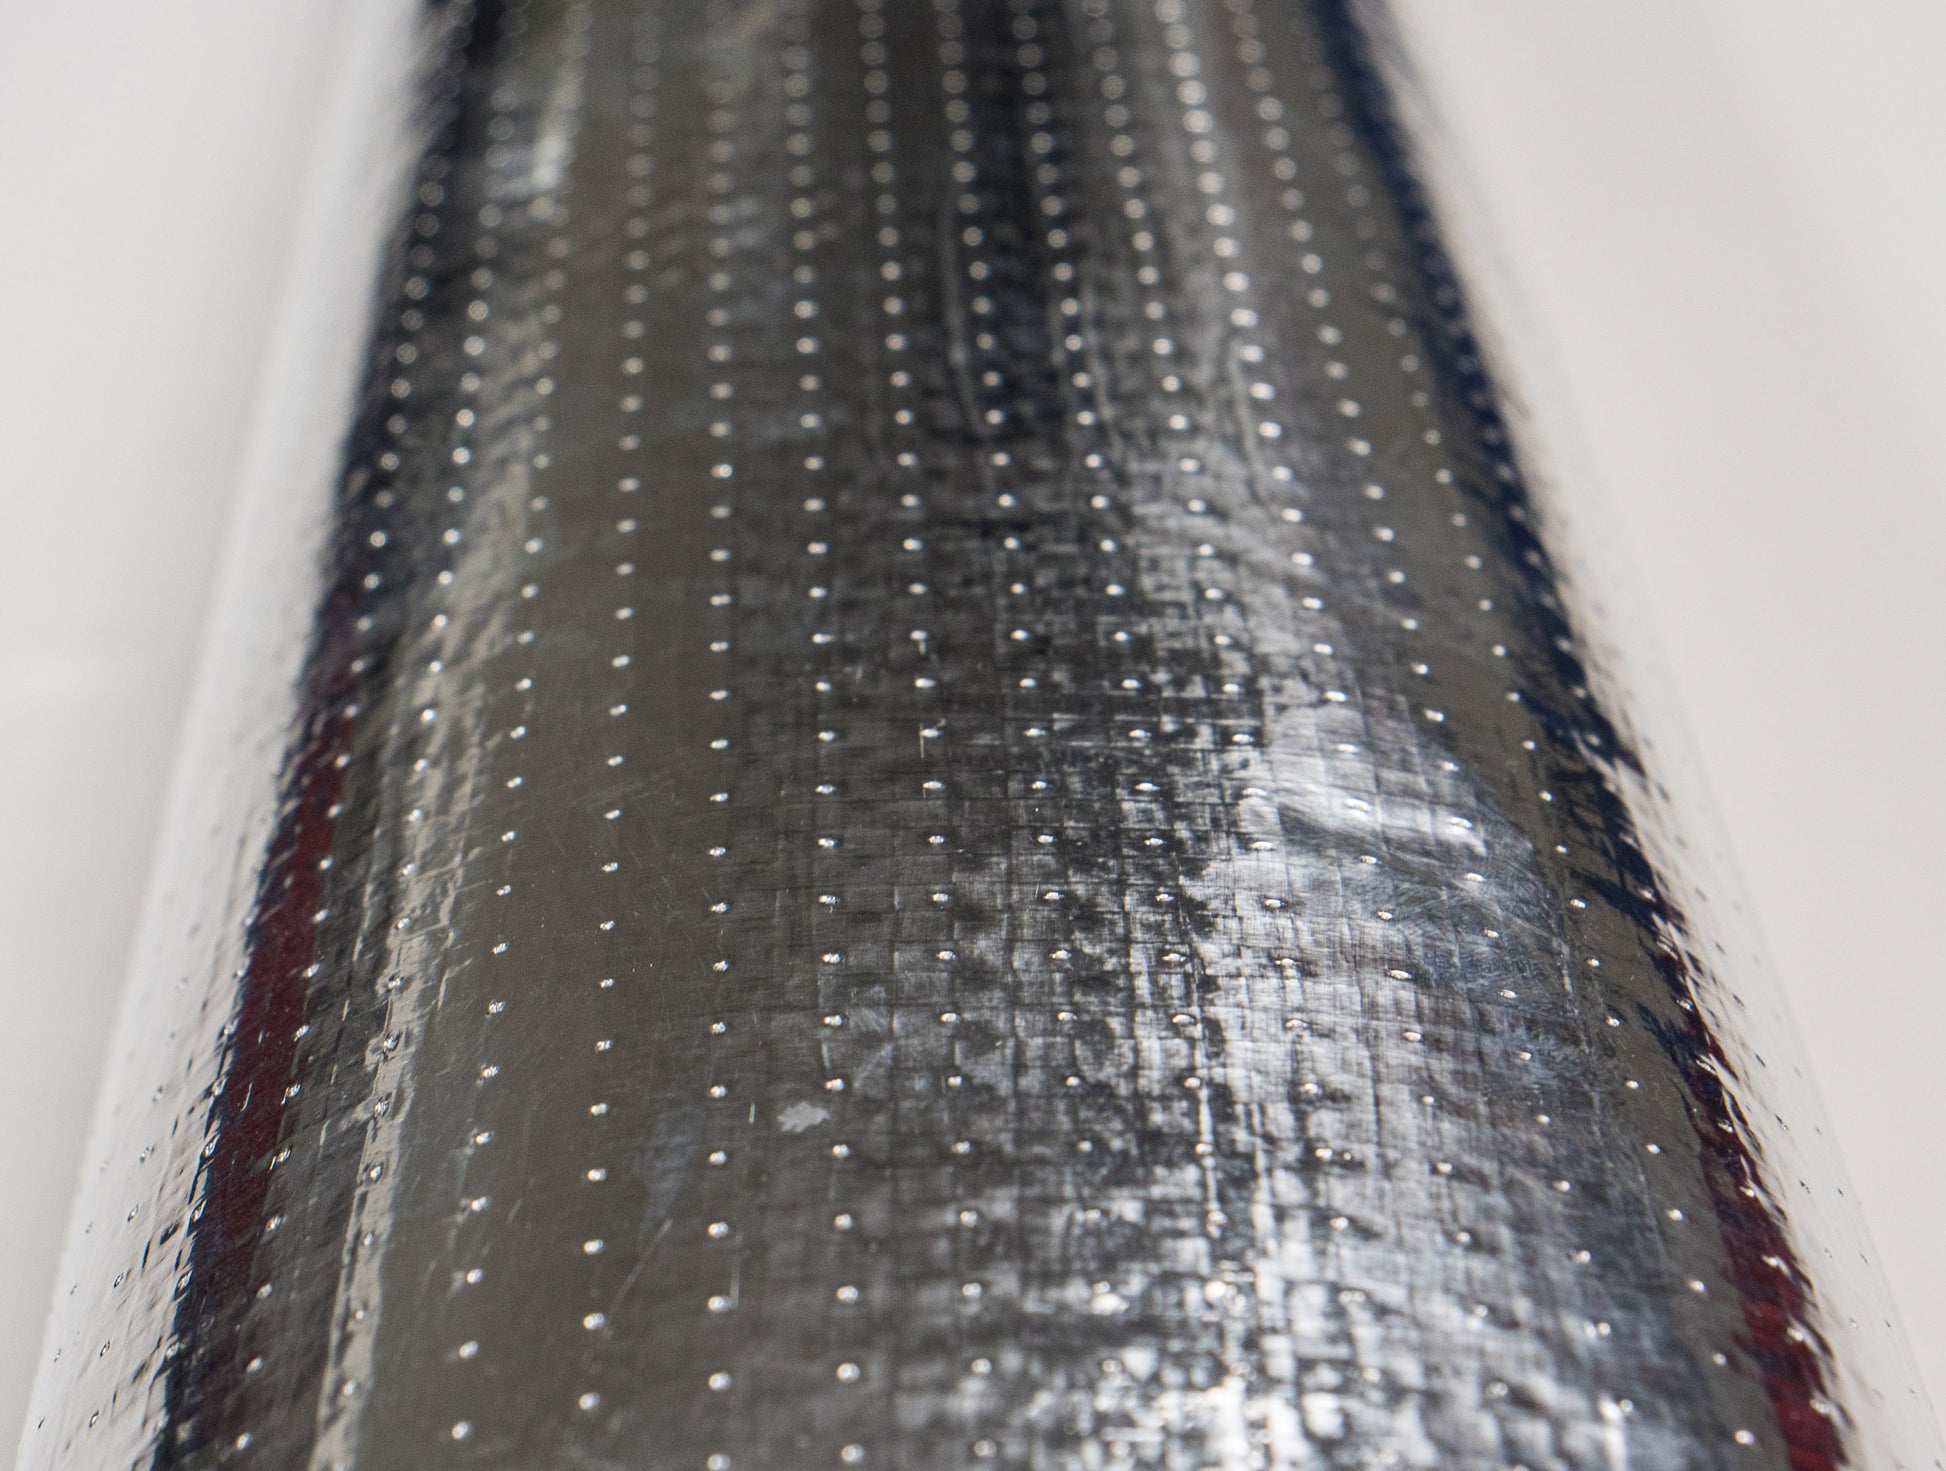 Perforations on SCIF roll